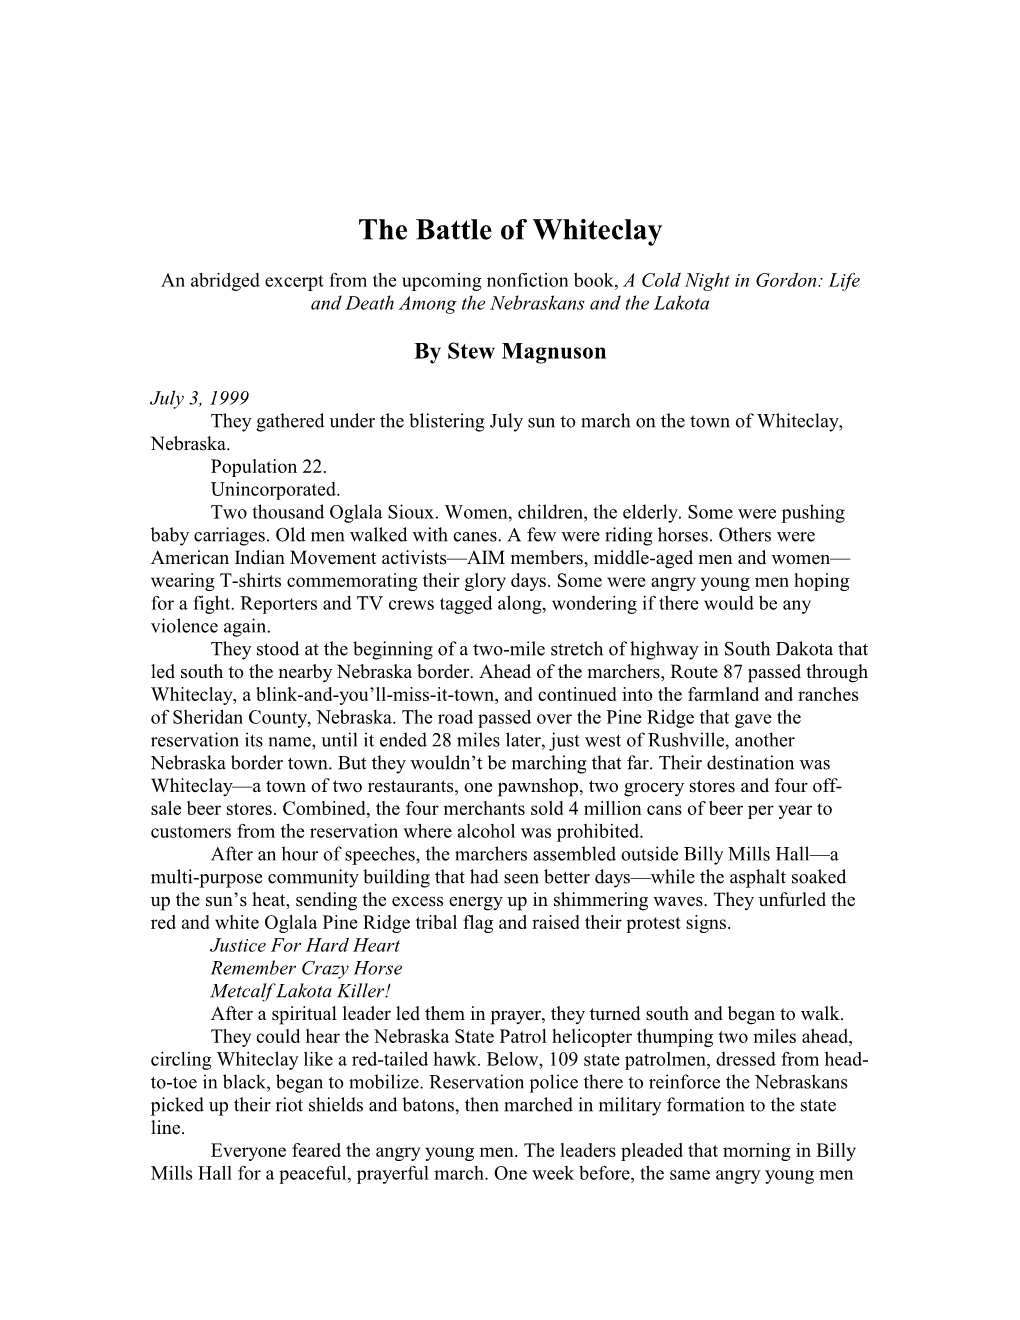 The Battle of Whiteclay